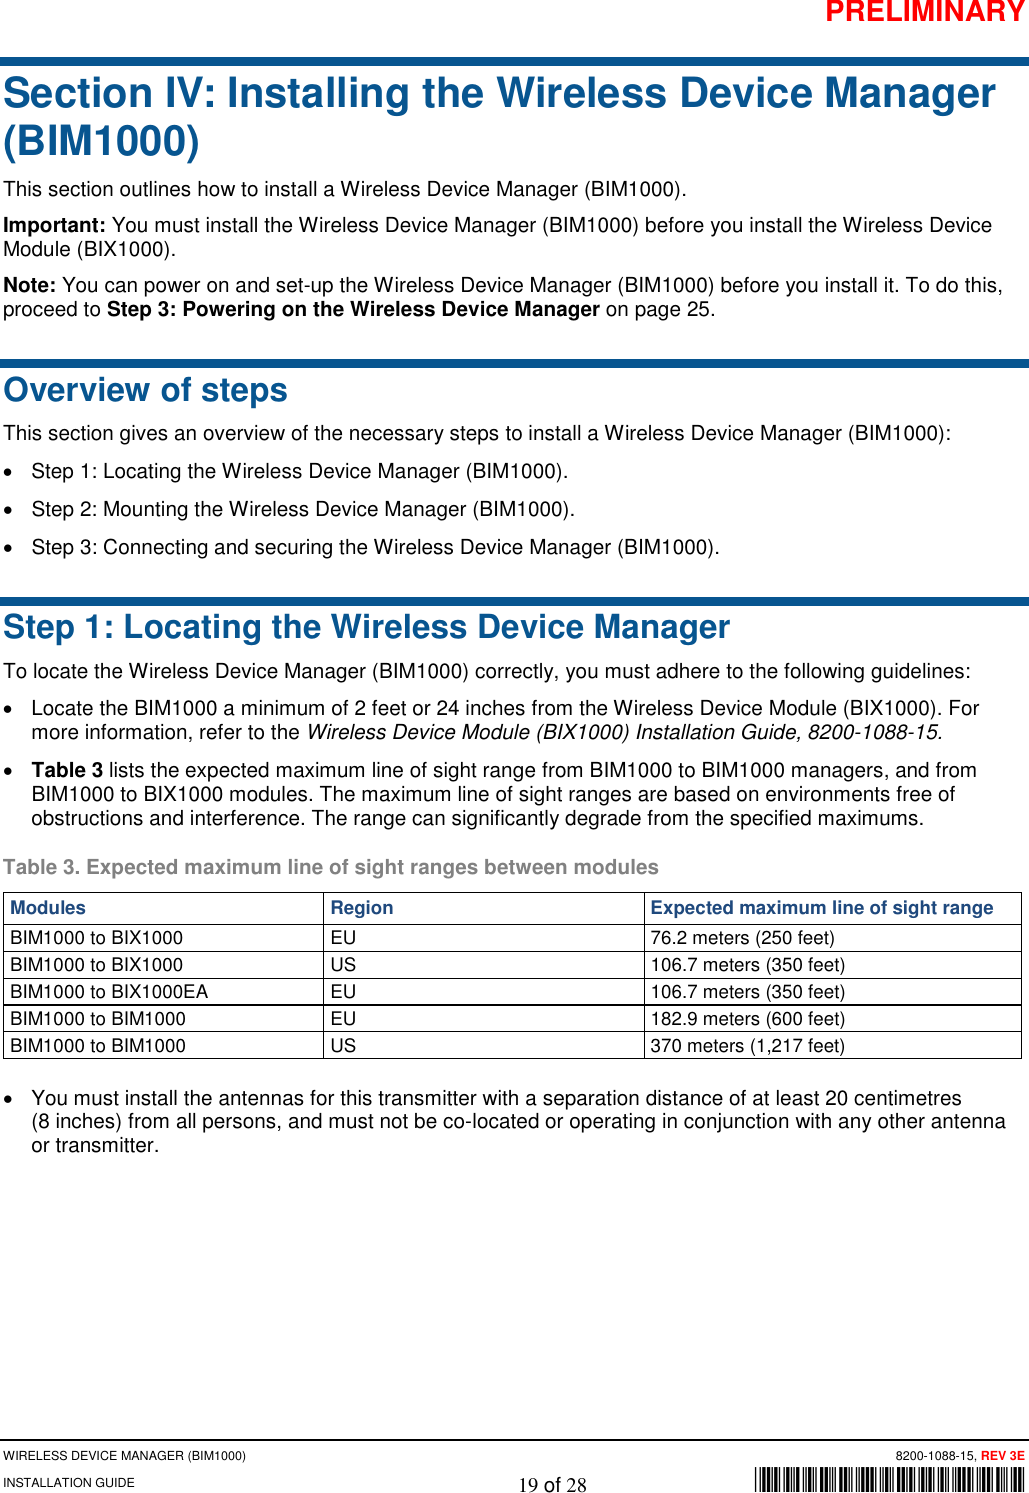 PRELIMINARY WIRELESS DEVICE MANAGER (BIM1000)      8200-1088-15, REV 3E INSTALLATION GUIDE    19 of 28        *8200-1088-15* Section IV: Installing the Wireless Device Manager (BIM1000) This section outlines how to install a Wireless Device Manager (BIM1000). Important: You must install the Wireless Device Manager (BIM1000) before you install the Wireless Device Module (BIX1000). Note: You can power on and set-up the Wireless Device Manager (BIM1000) before you install it. To do this, proceed to Step 3: Powering on the Wireless Device Manager on page 25. Overview of steps This section gives an overview of the necessary steps to install a Wireless Device Manager (BIM1000): • Step 1: Locating the Wireless Device Manager (BIM1000). • Step 2: Mounting the Wireless Device Manager (BIM1000). • Step 3: Connecting and securing the Wireless Device Manager (BIM1000). Step 1: Locating the Wireless Device Manager To locate the Wireless Device Manager (BIM1000) correctly, you must adhere to the following guidelines: • Locate the BIM1000 a minimum of 2 feet or 24 inches from the Wireless Device Module (BIX1000). For more information, refer to the Wireless Device Module (BIX1000) Installation Guide, 8200-1088-15. • Table 3 lists the expected maximum line of sight range from BIM1000 to BIM1000 managers, and from BIM1000 to BIX1000 modules. The maximum line of sight ranges are based on environments free of obstructions and interference. The range can significantly degrade from the specified maximums.  Table 3. Expected maximum line of sight ranges between modules Modules Region Expected maximum line of sight range BIM1000 to BIX1000 EU 76.2 meters (250 feet) BIM1000 to BIX1000 US 106.7 meters (350 feet) BIM1000 to BIX1000EA EU 106.7 meters (350 feet) BIM1000 to BIM1000 EU 182.9 meters (600 feet) BIM1000 to BIM1000 US 370 meters (1,217 feet) • You must install the antennas for this transmitter with a separation distance of at least 20 centimetres  (8 inches) from all persons, and must not be co-located or operating in conjunction with any other antenna or transmitter.    